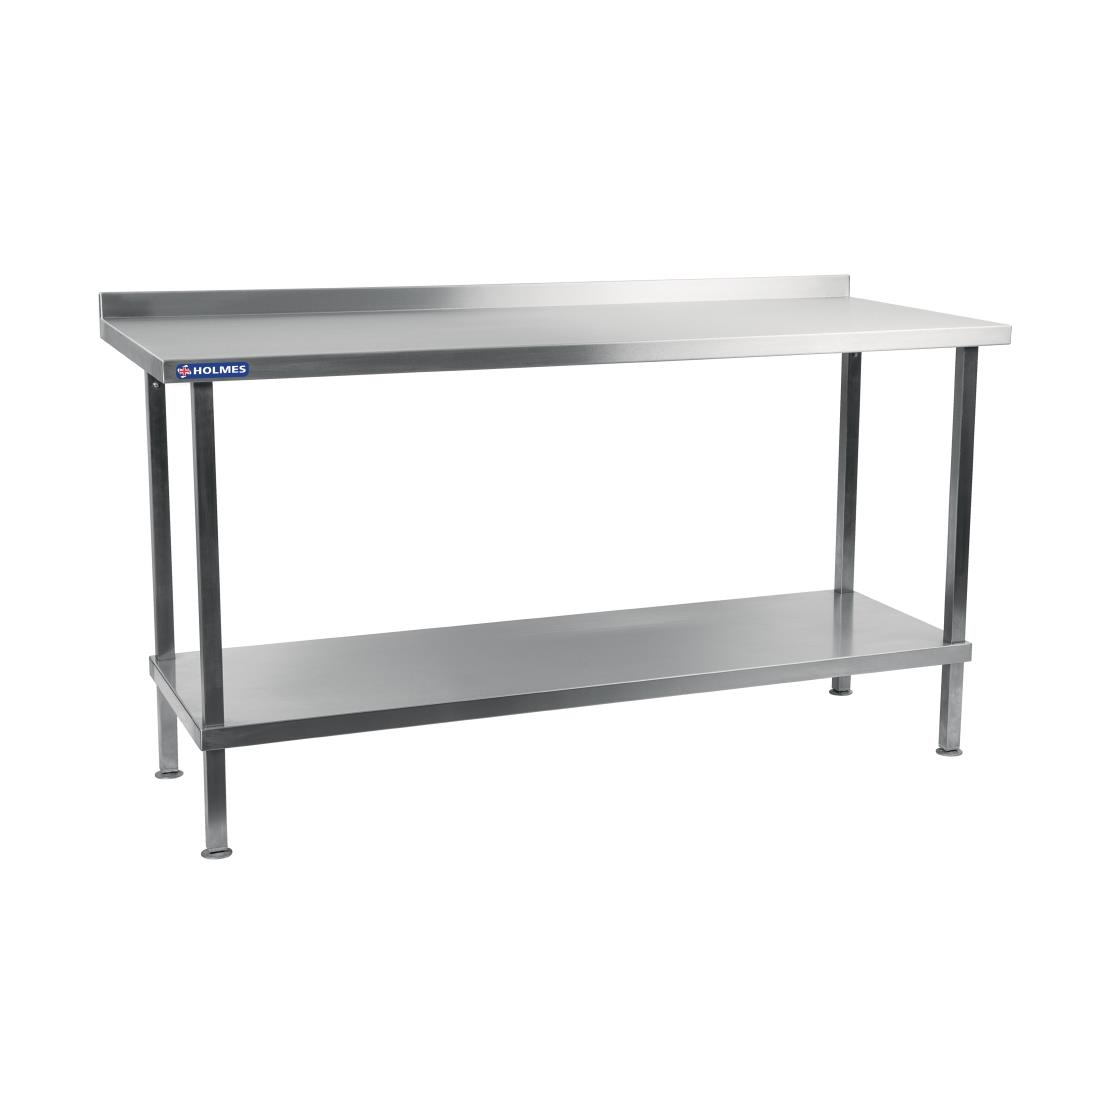 Holmes Stainless Steel Wall Table with Upstand 2100mm